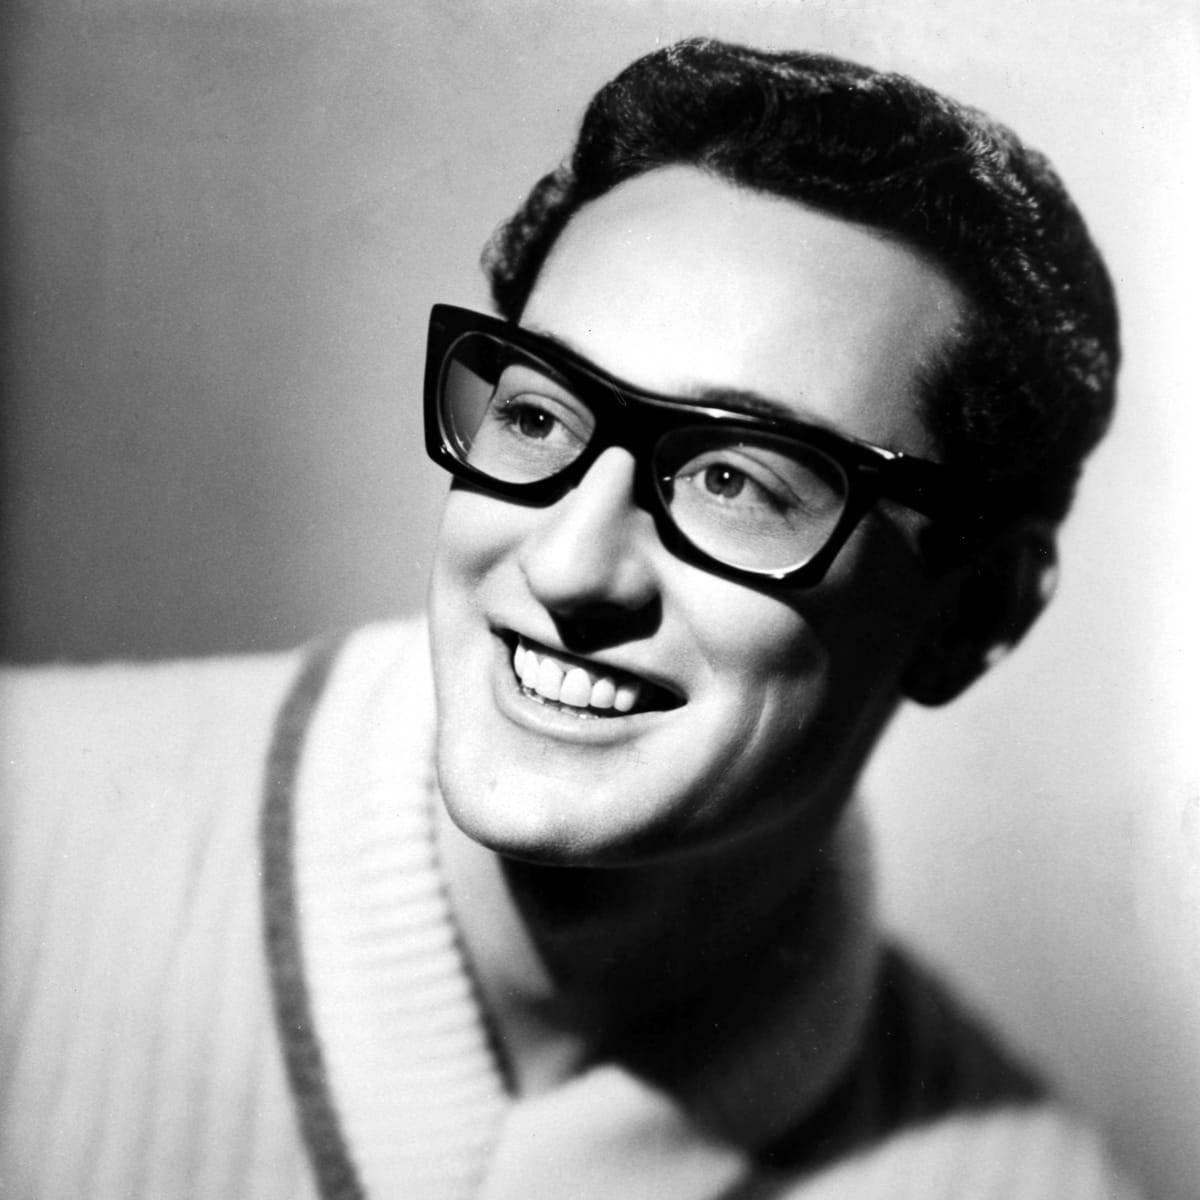 Musician Buddy Holly And The Crickets Portrait Wallpaper